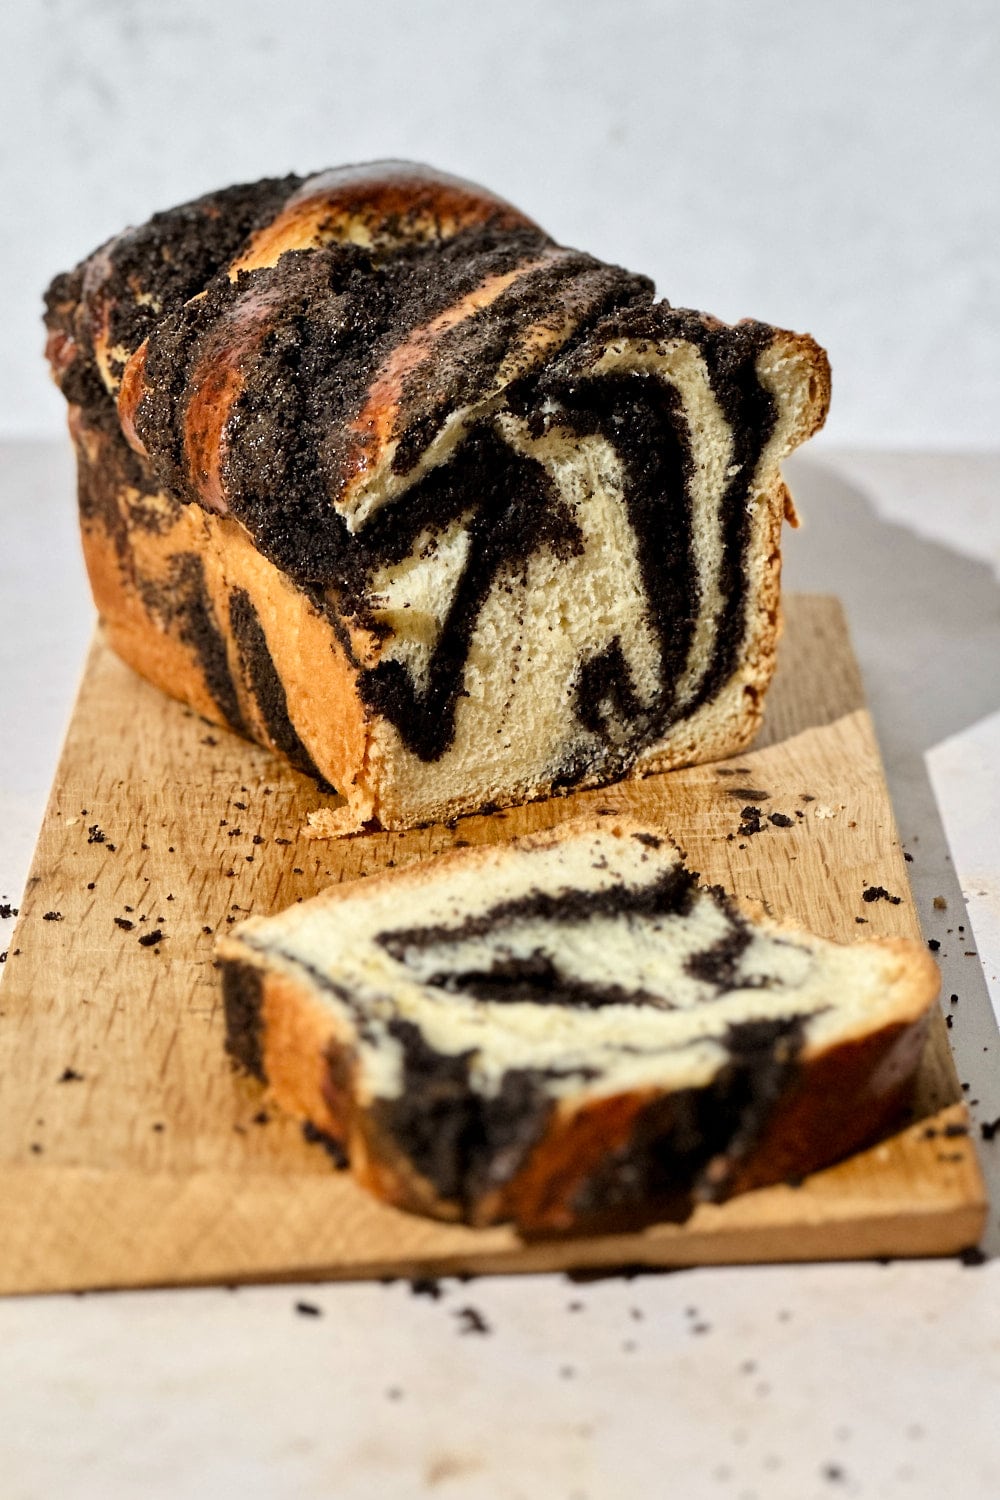 Homemade poppy seed sourdough babka on a wooden board with a slice cut off.